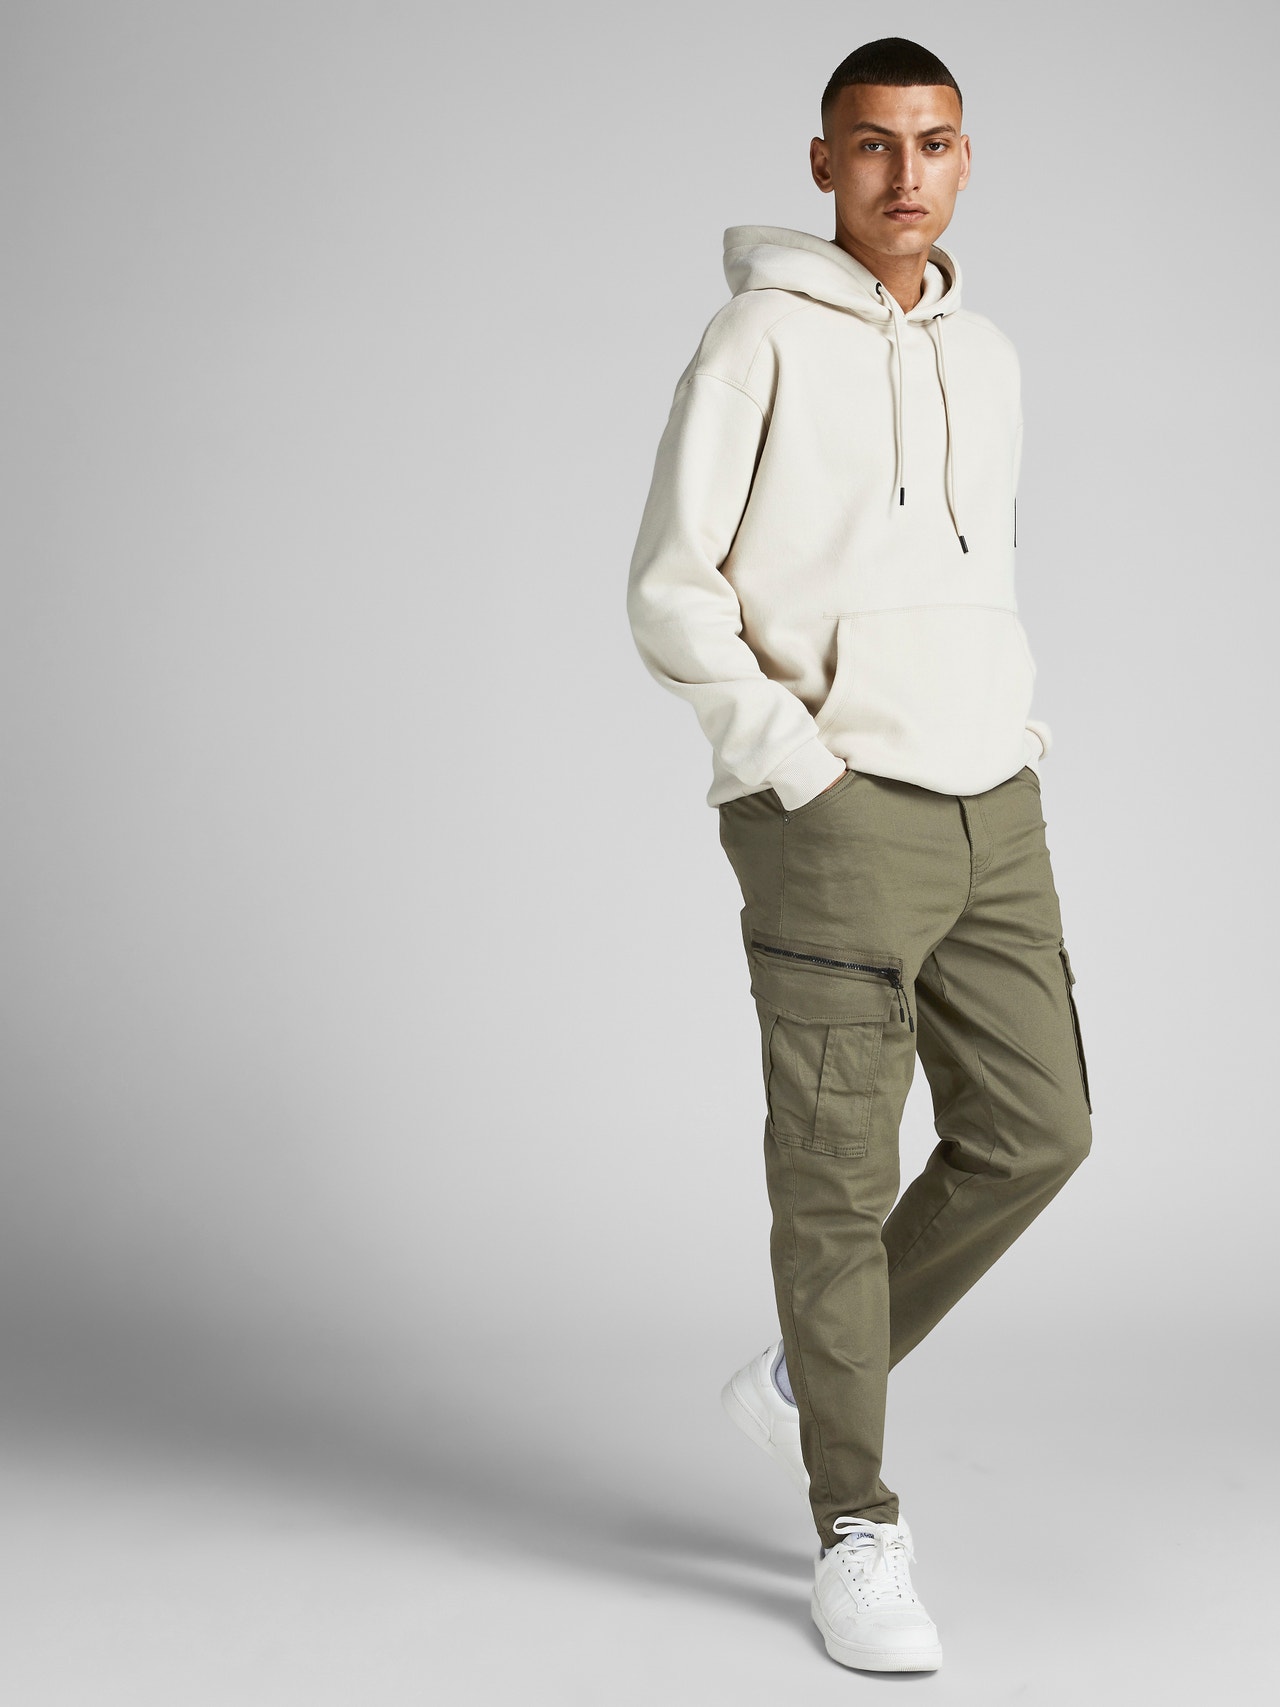 Jack & Jones Tapered Fit Cargo Pants -Dusty Olive - 12194240